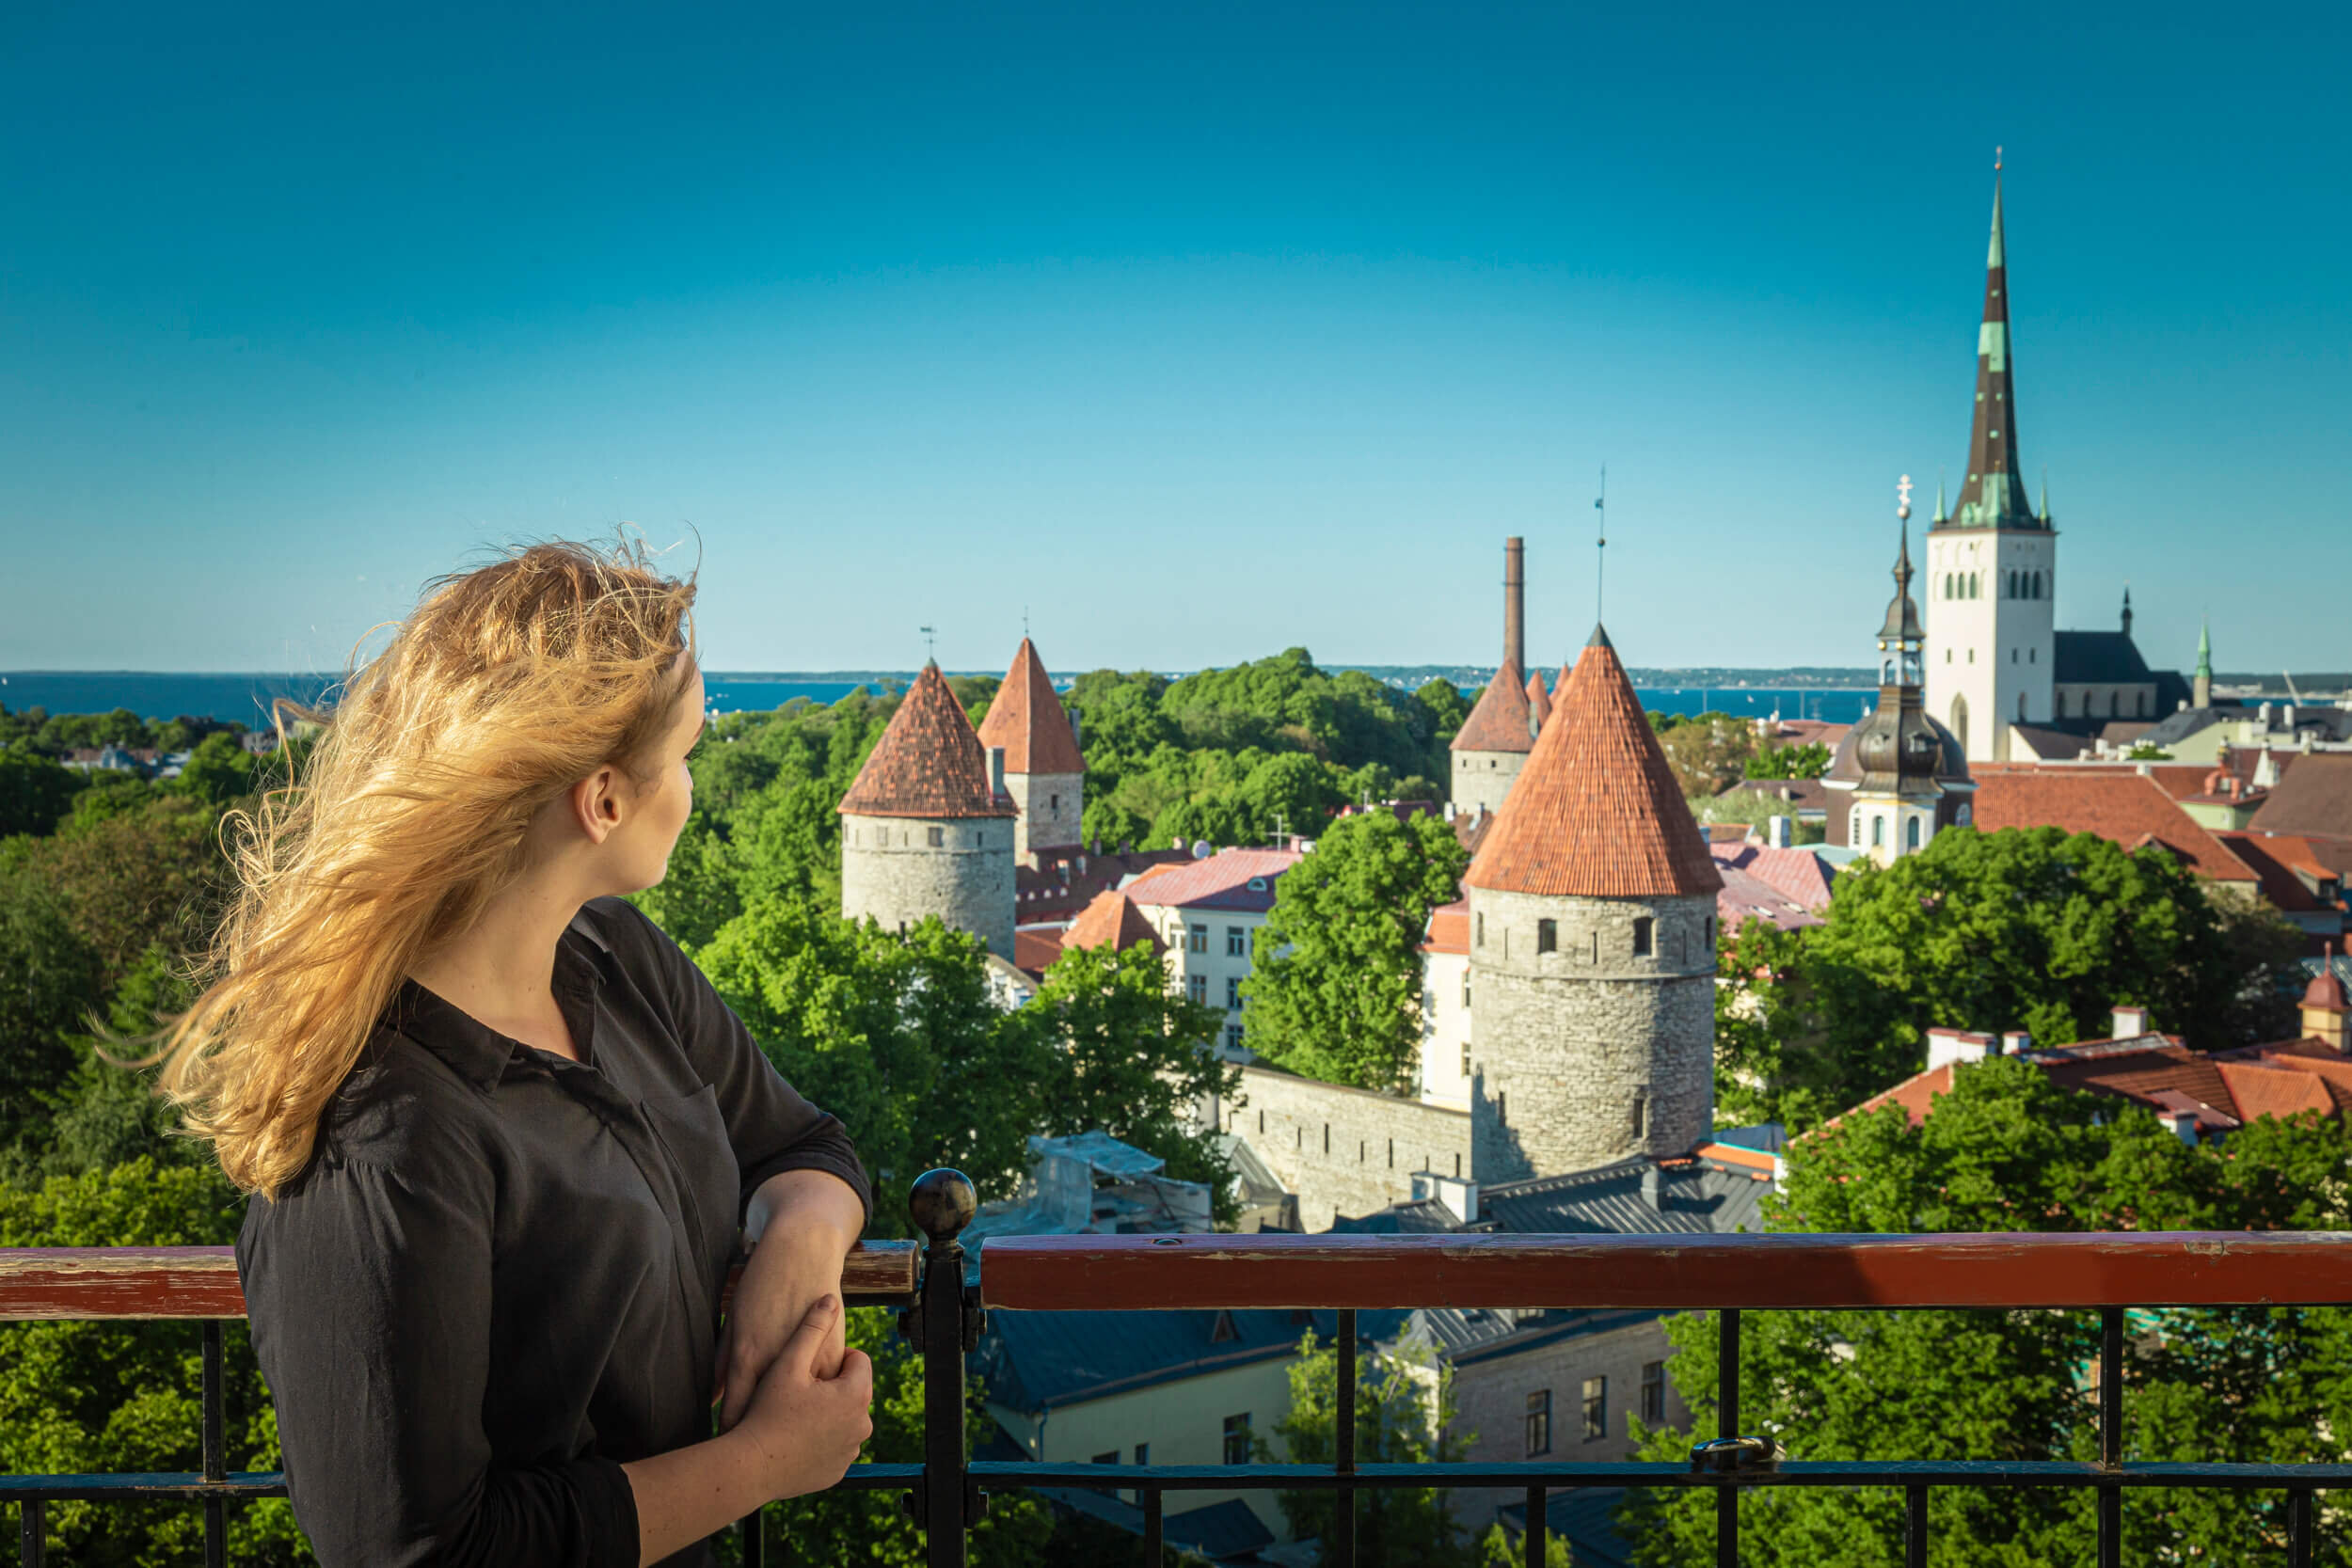 Explore the magic of Tallinn with a unique photoshoot